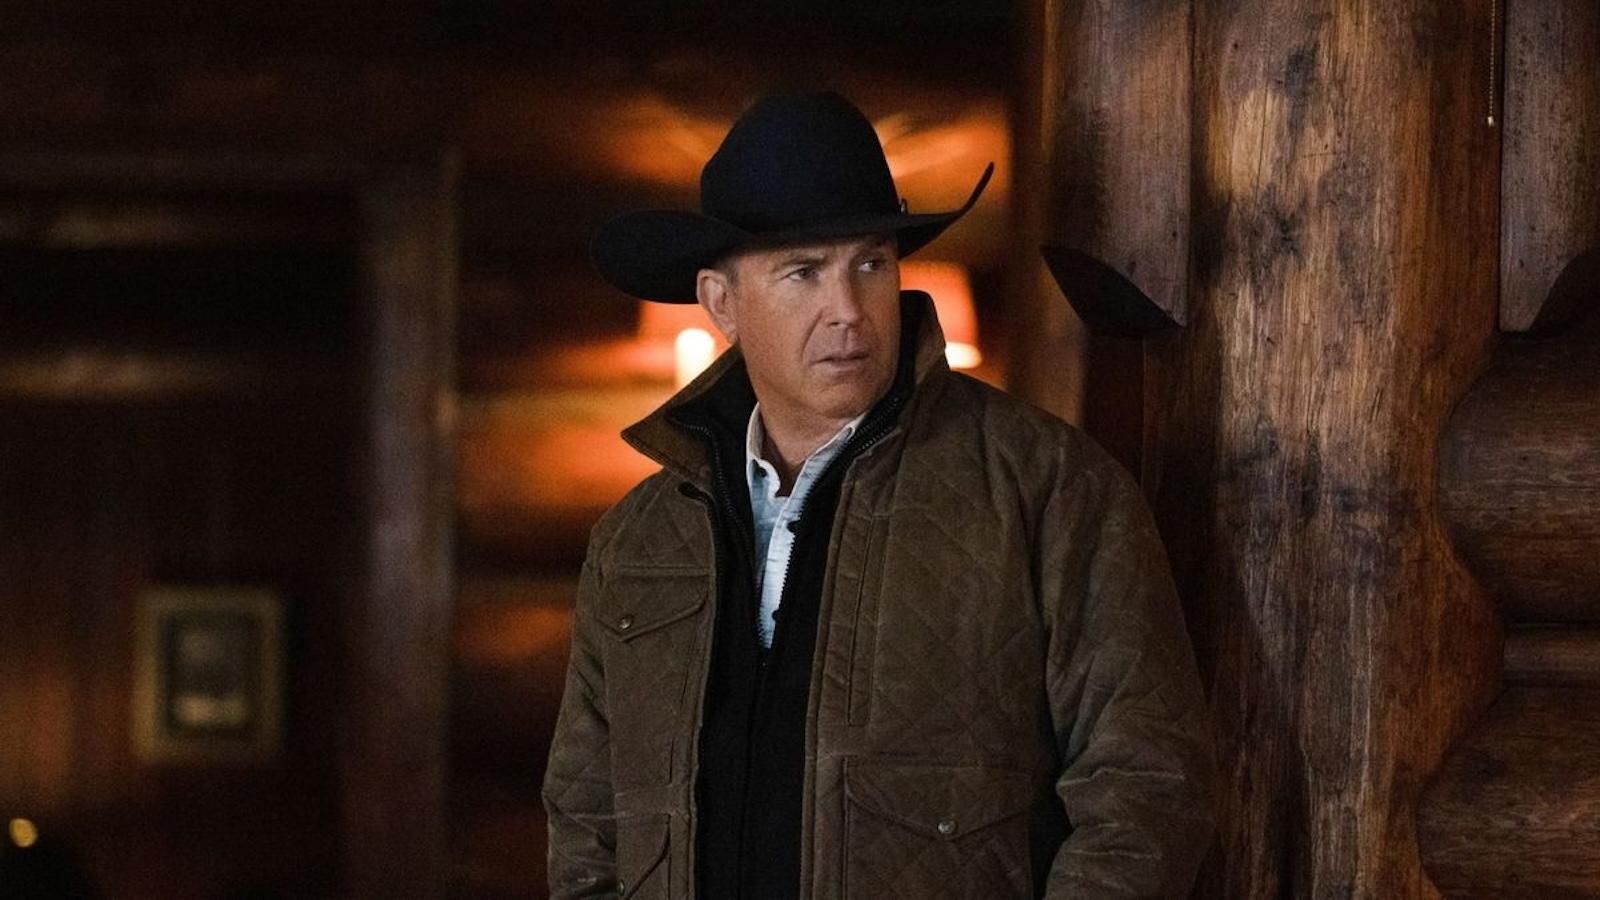 Yellowstone actor Kevin Costner as John Dutton